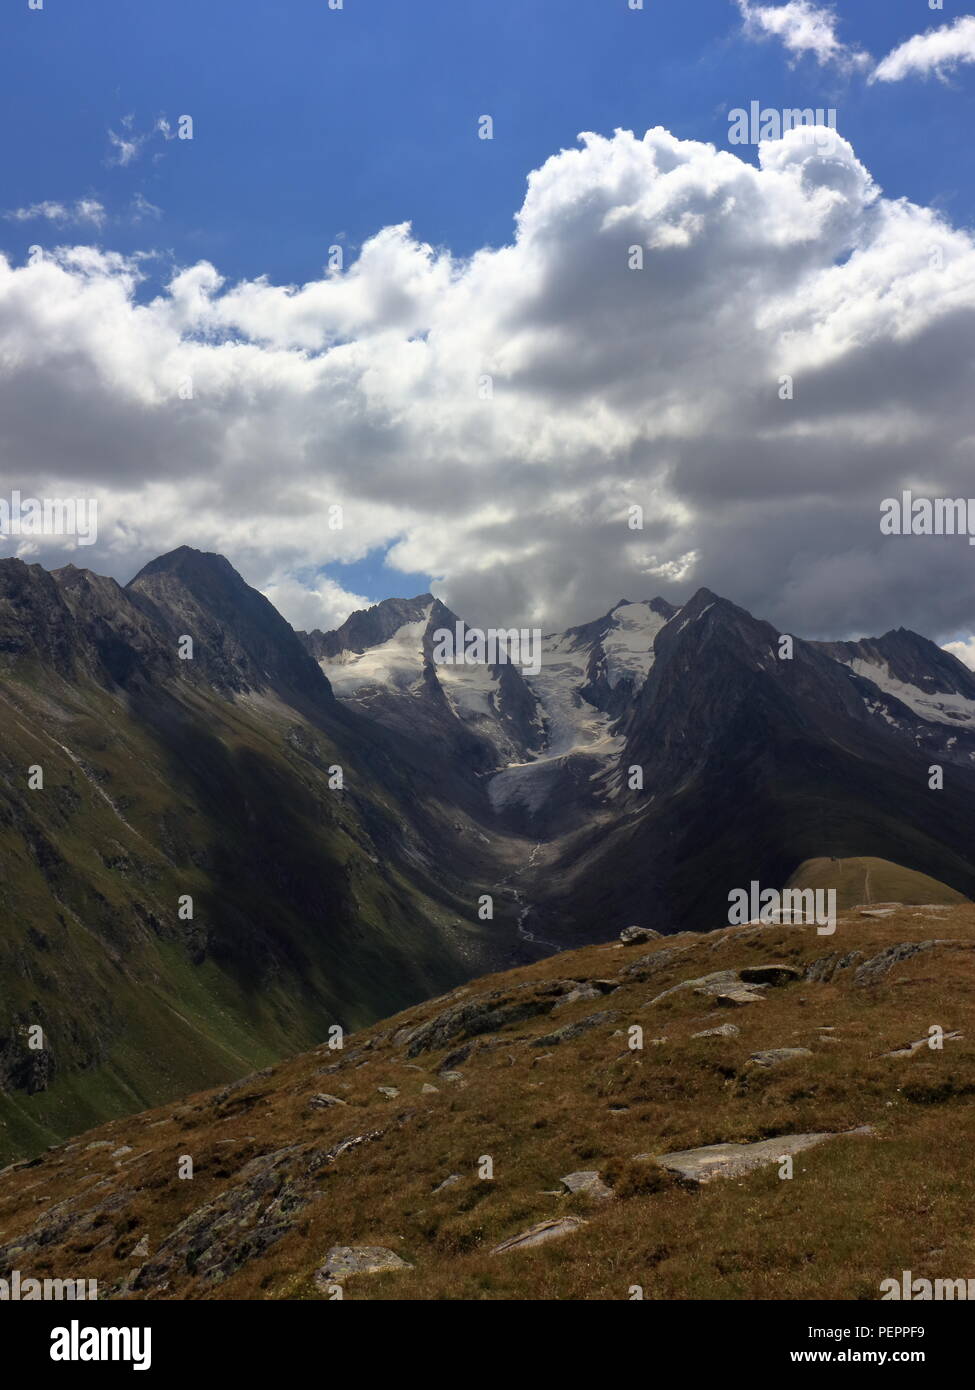 High mountains with glaciers near Obergurgl, Oetztal in Tyrol, Austria. Stock Photo